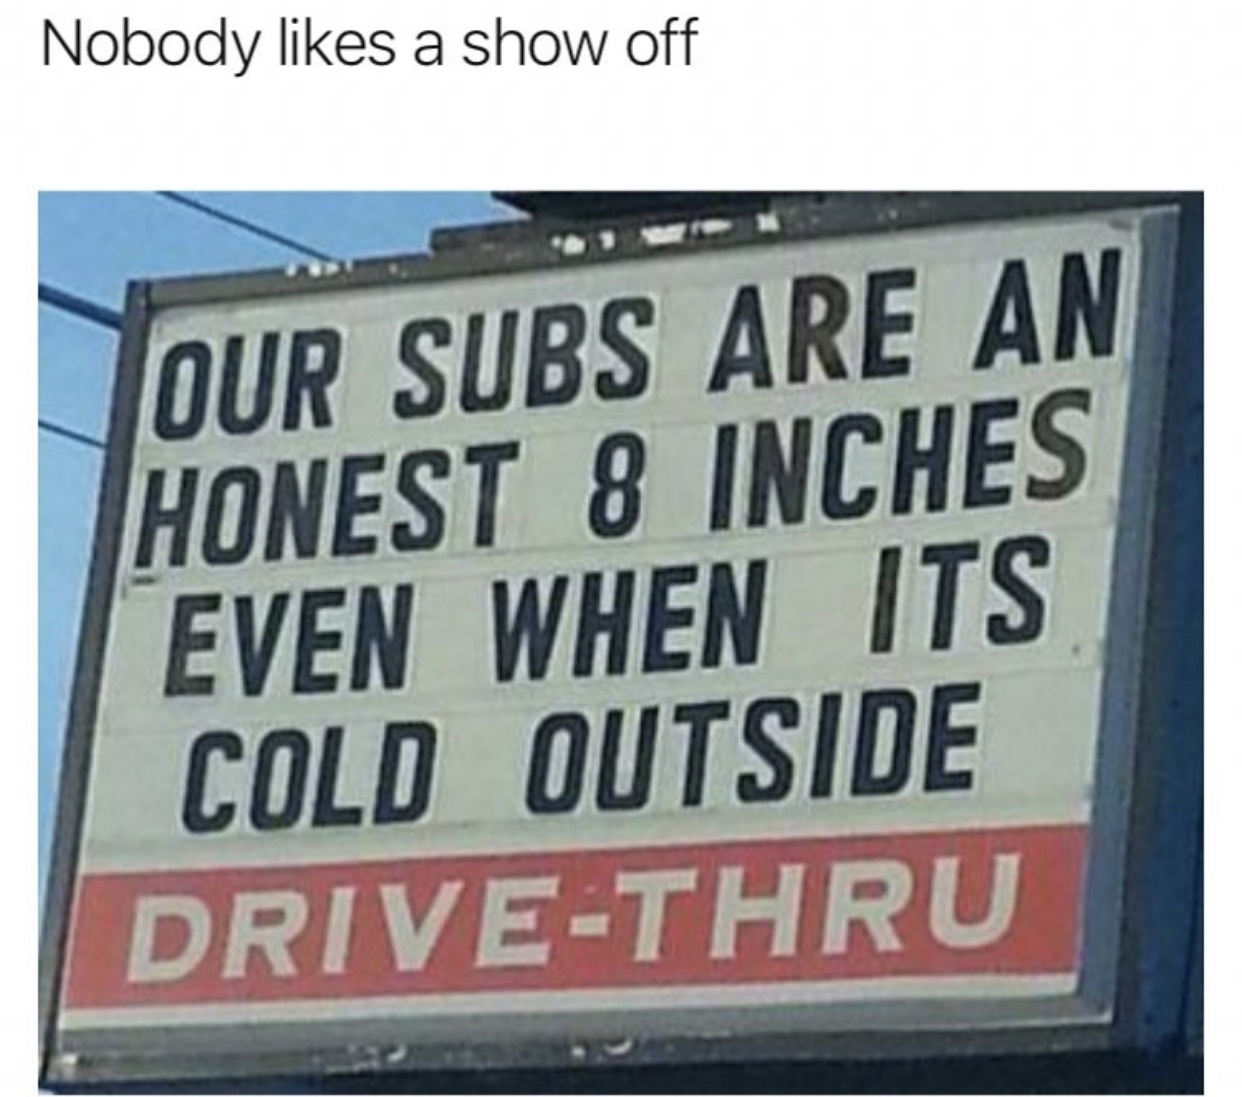 spit or swallow - Nobody a show off Our Subs Are An Honest 8 Inches Even When Its Cold Outside DriveThru